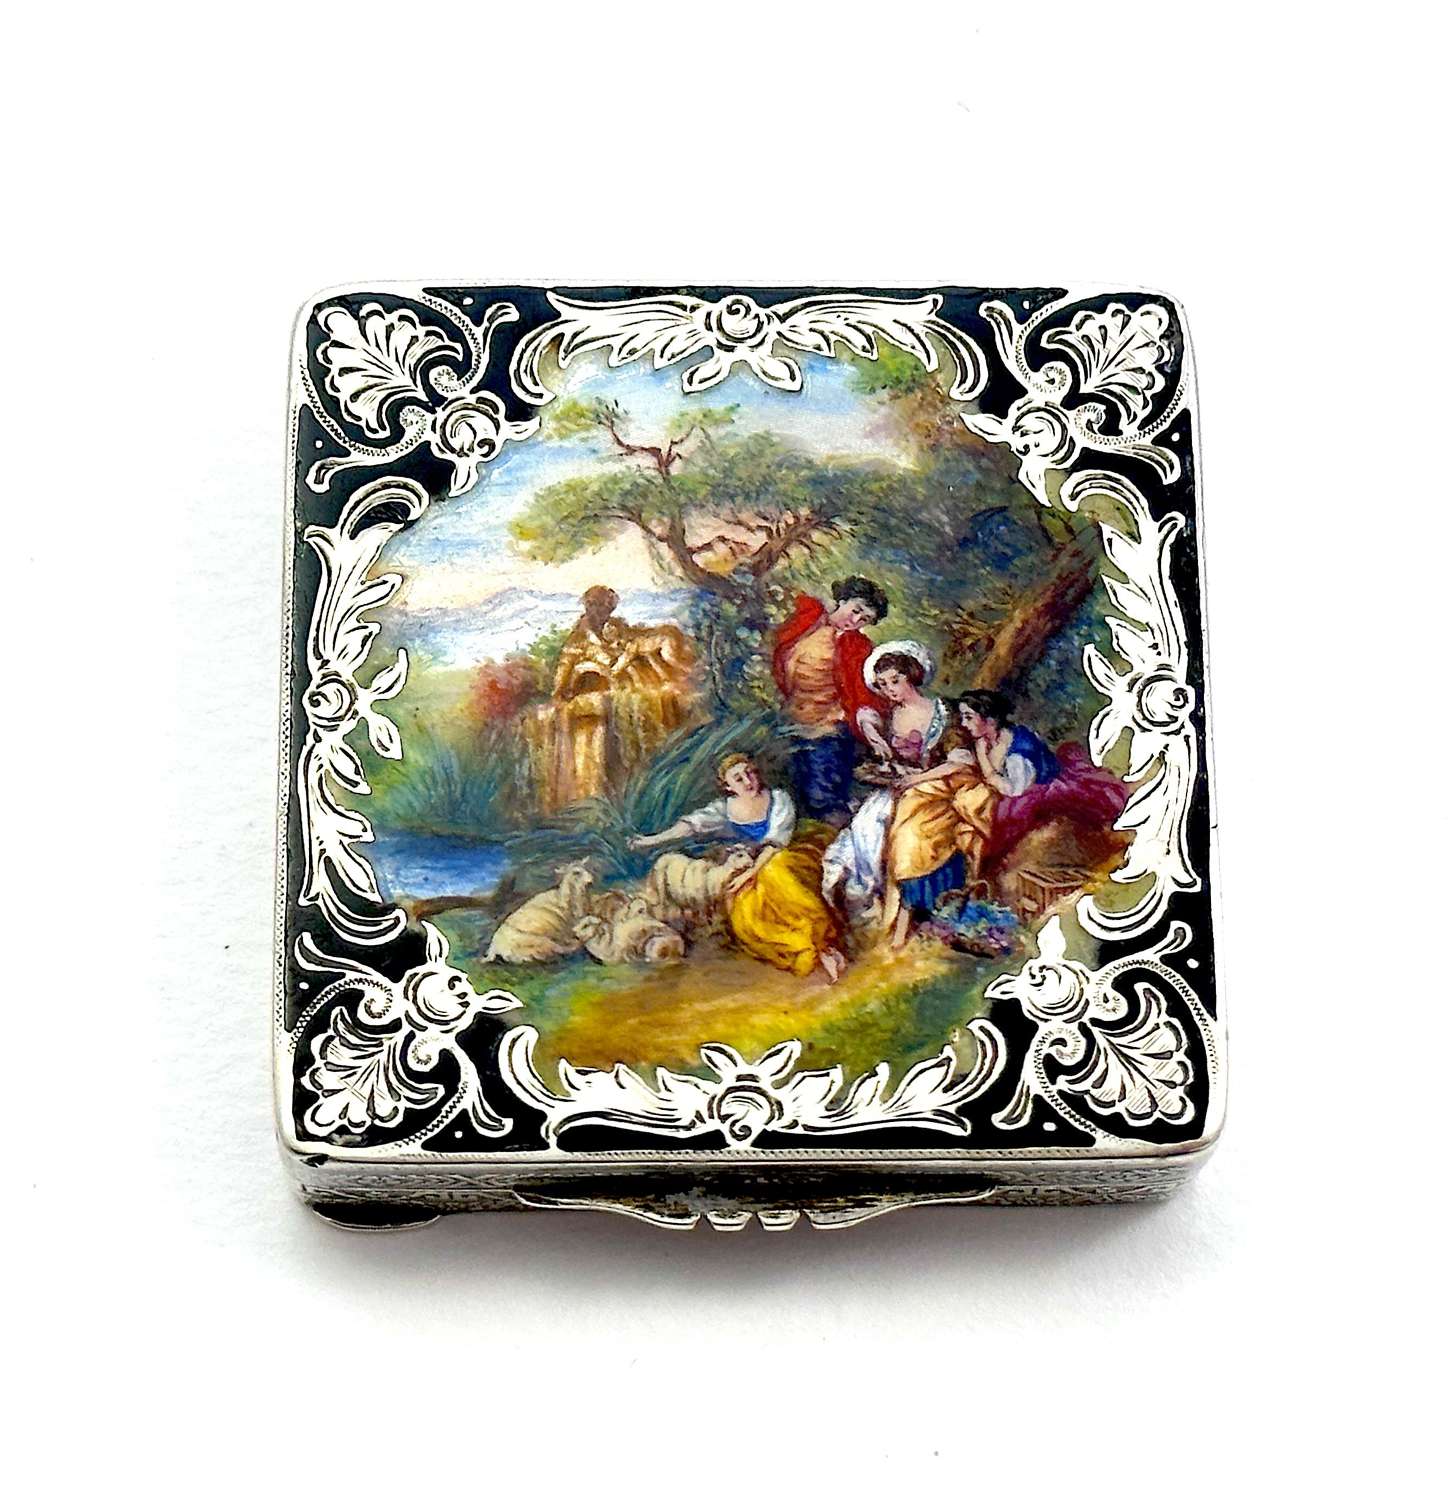 Antique Swiss Silver Compact with Hand Painted Enamel Miniature.